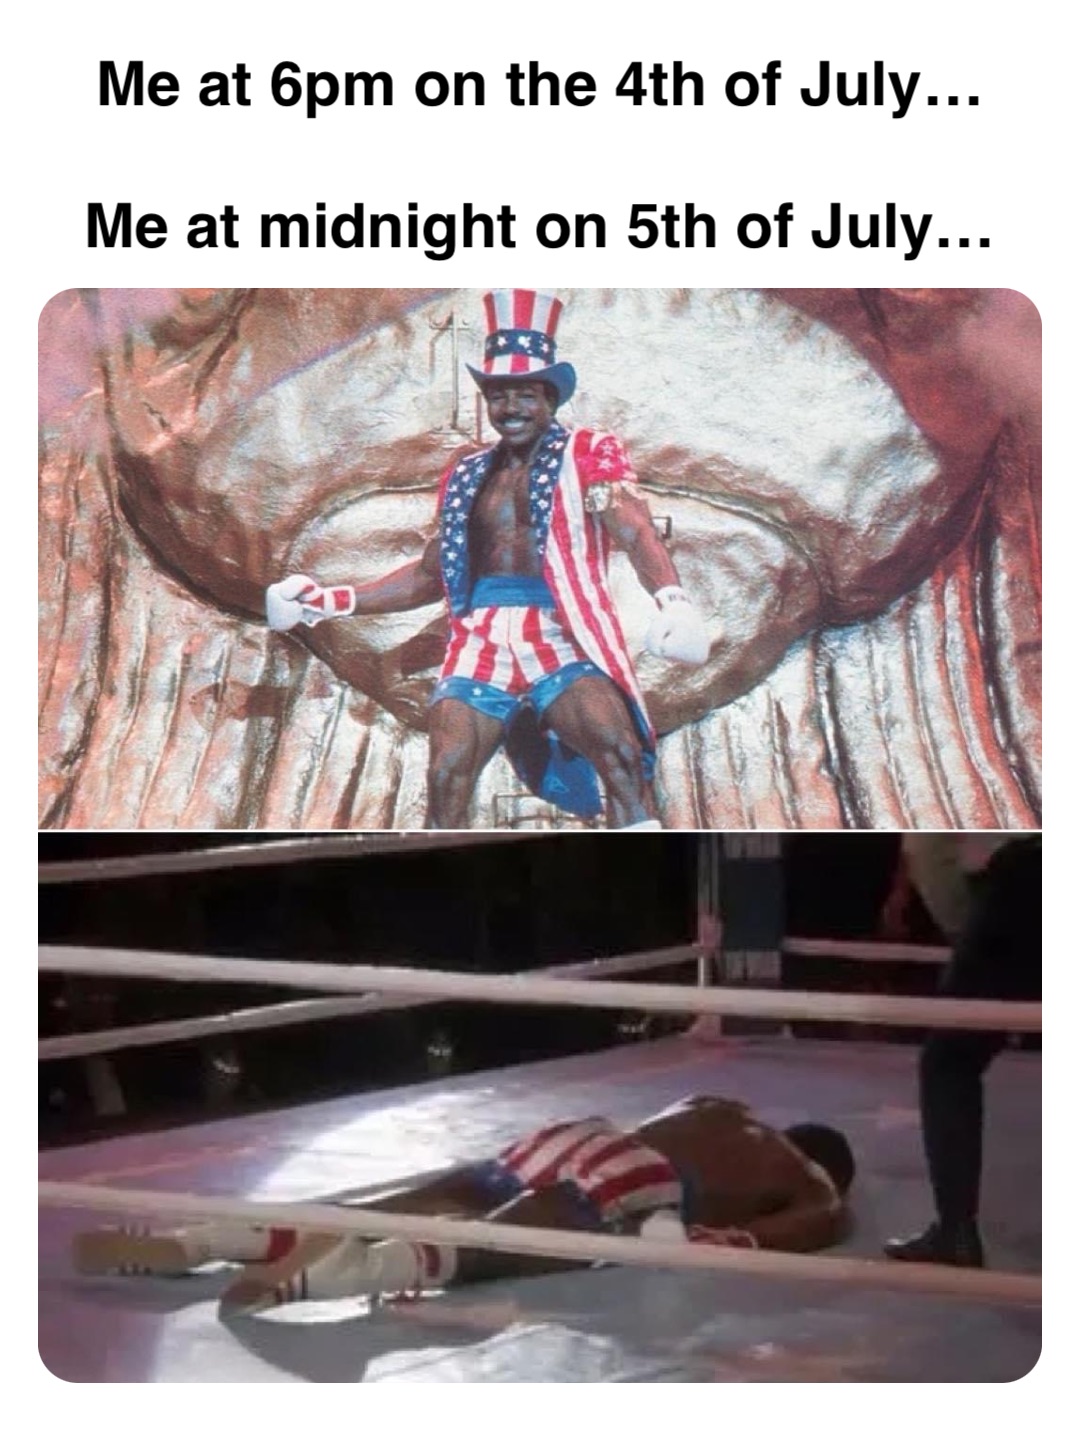 Double tap to edit Me at 6pm on the 4th of July…

Me at midnight on 5th of July…